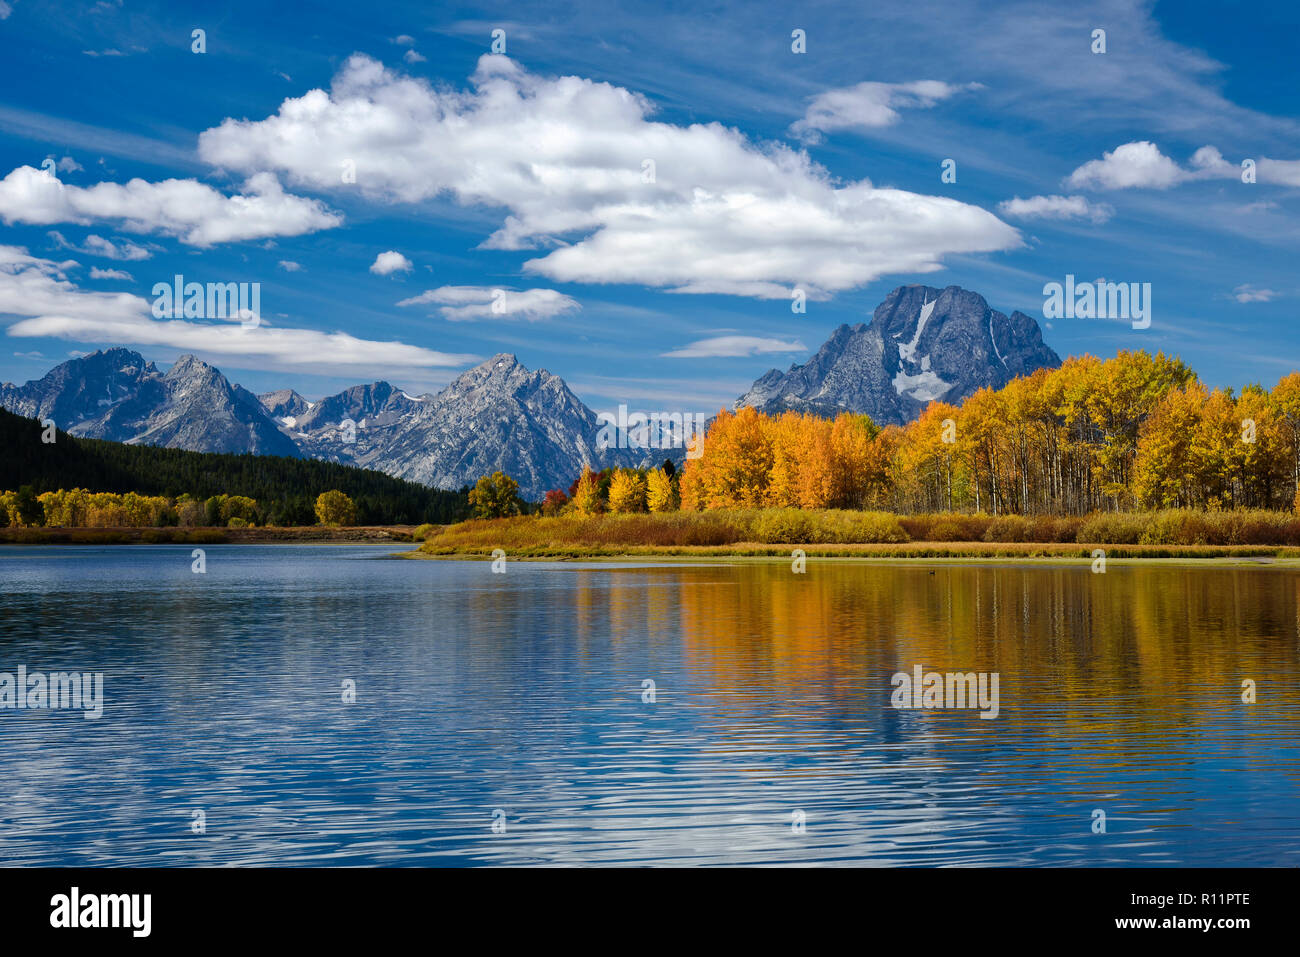 The Teton Range And Oxbow Bend On The Snake River In Grand Teton